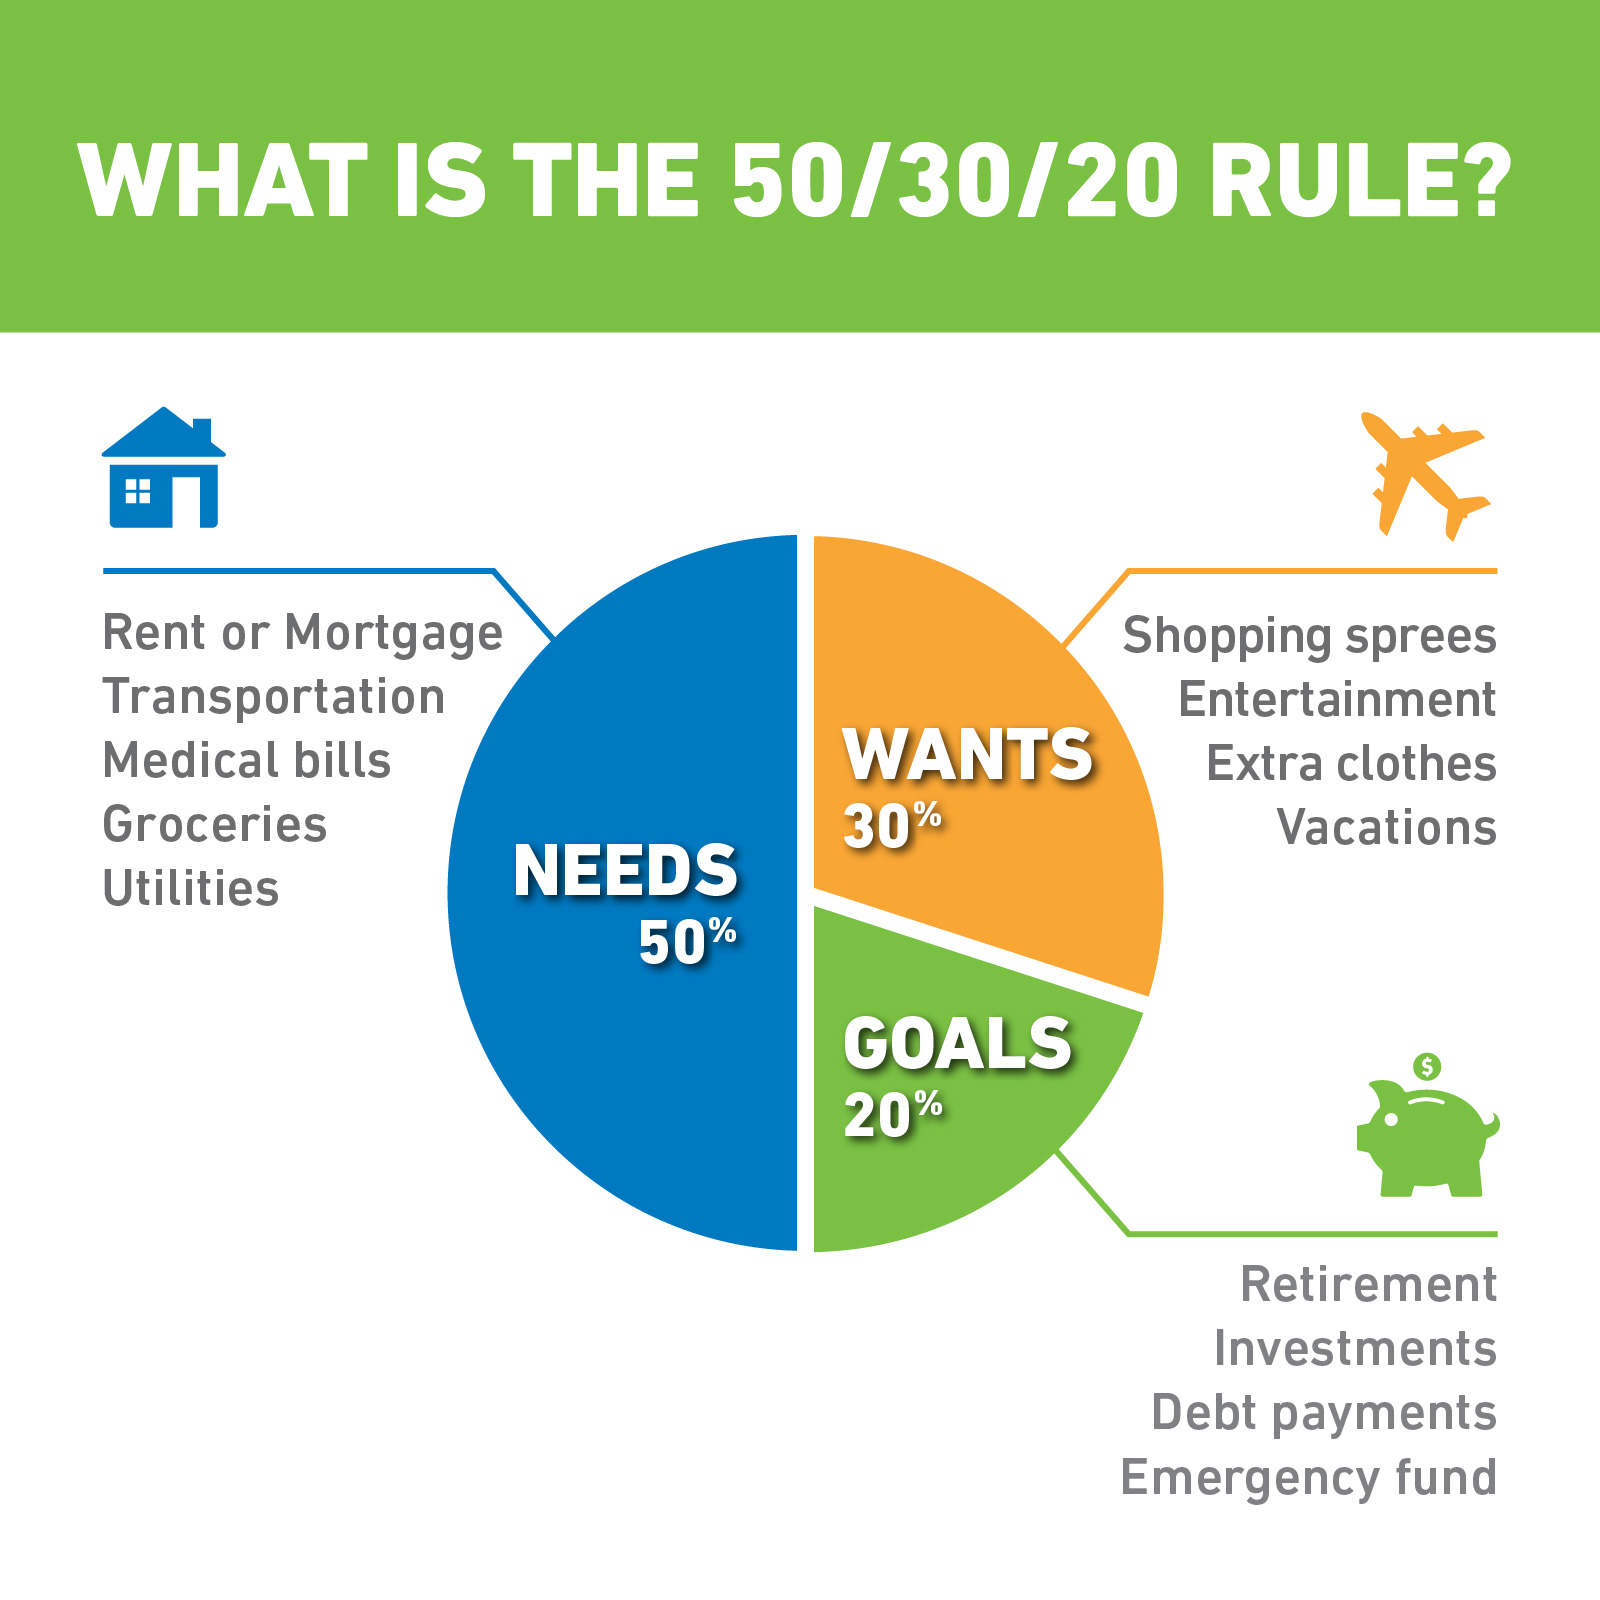 What is the 50/30/20 rule? Allocating 50% to your needs, 30% to wants and 20% to goals.